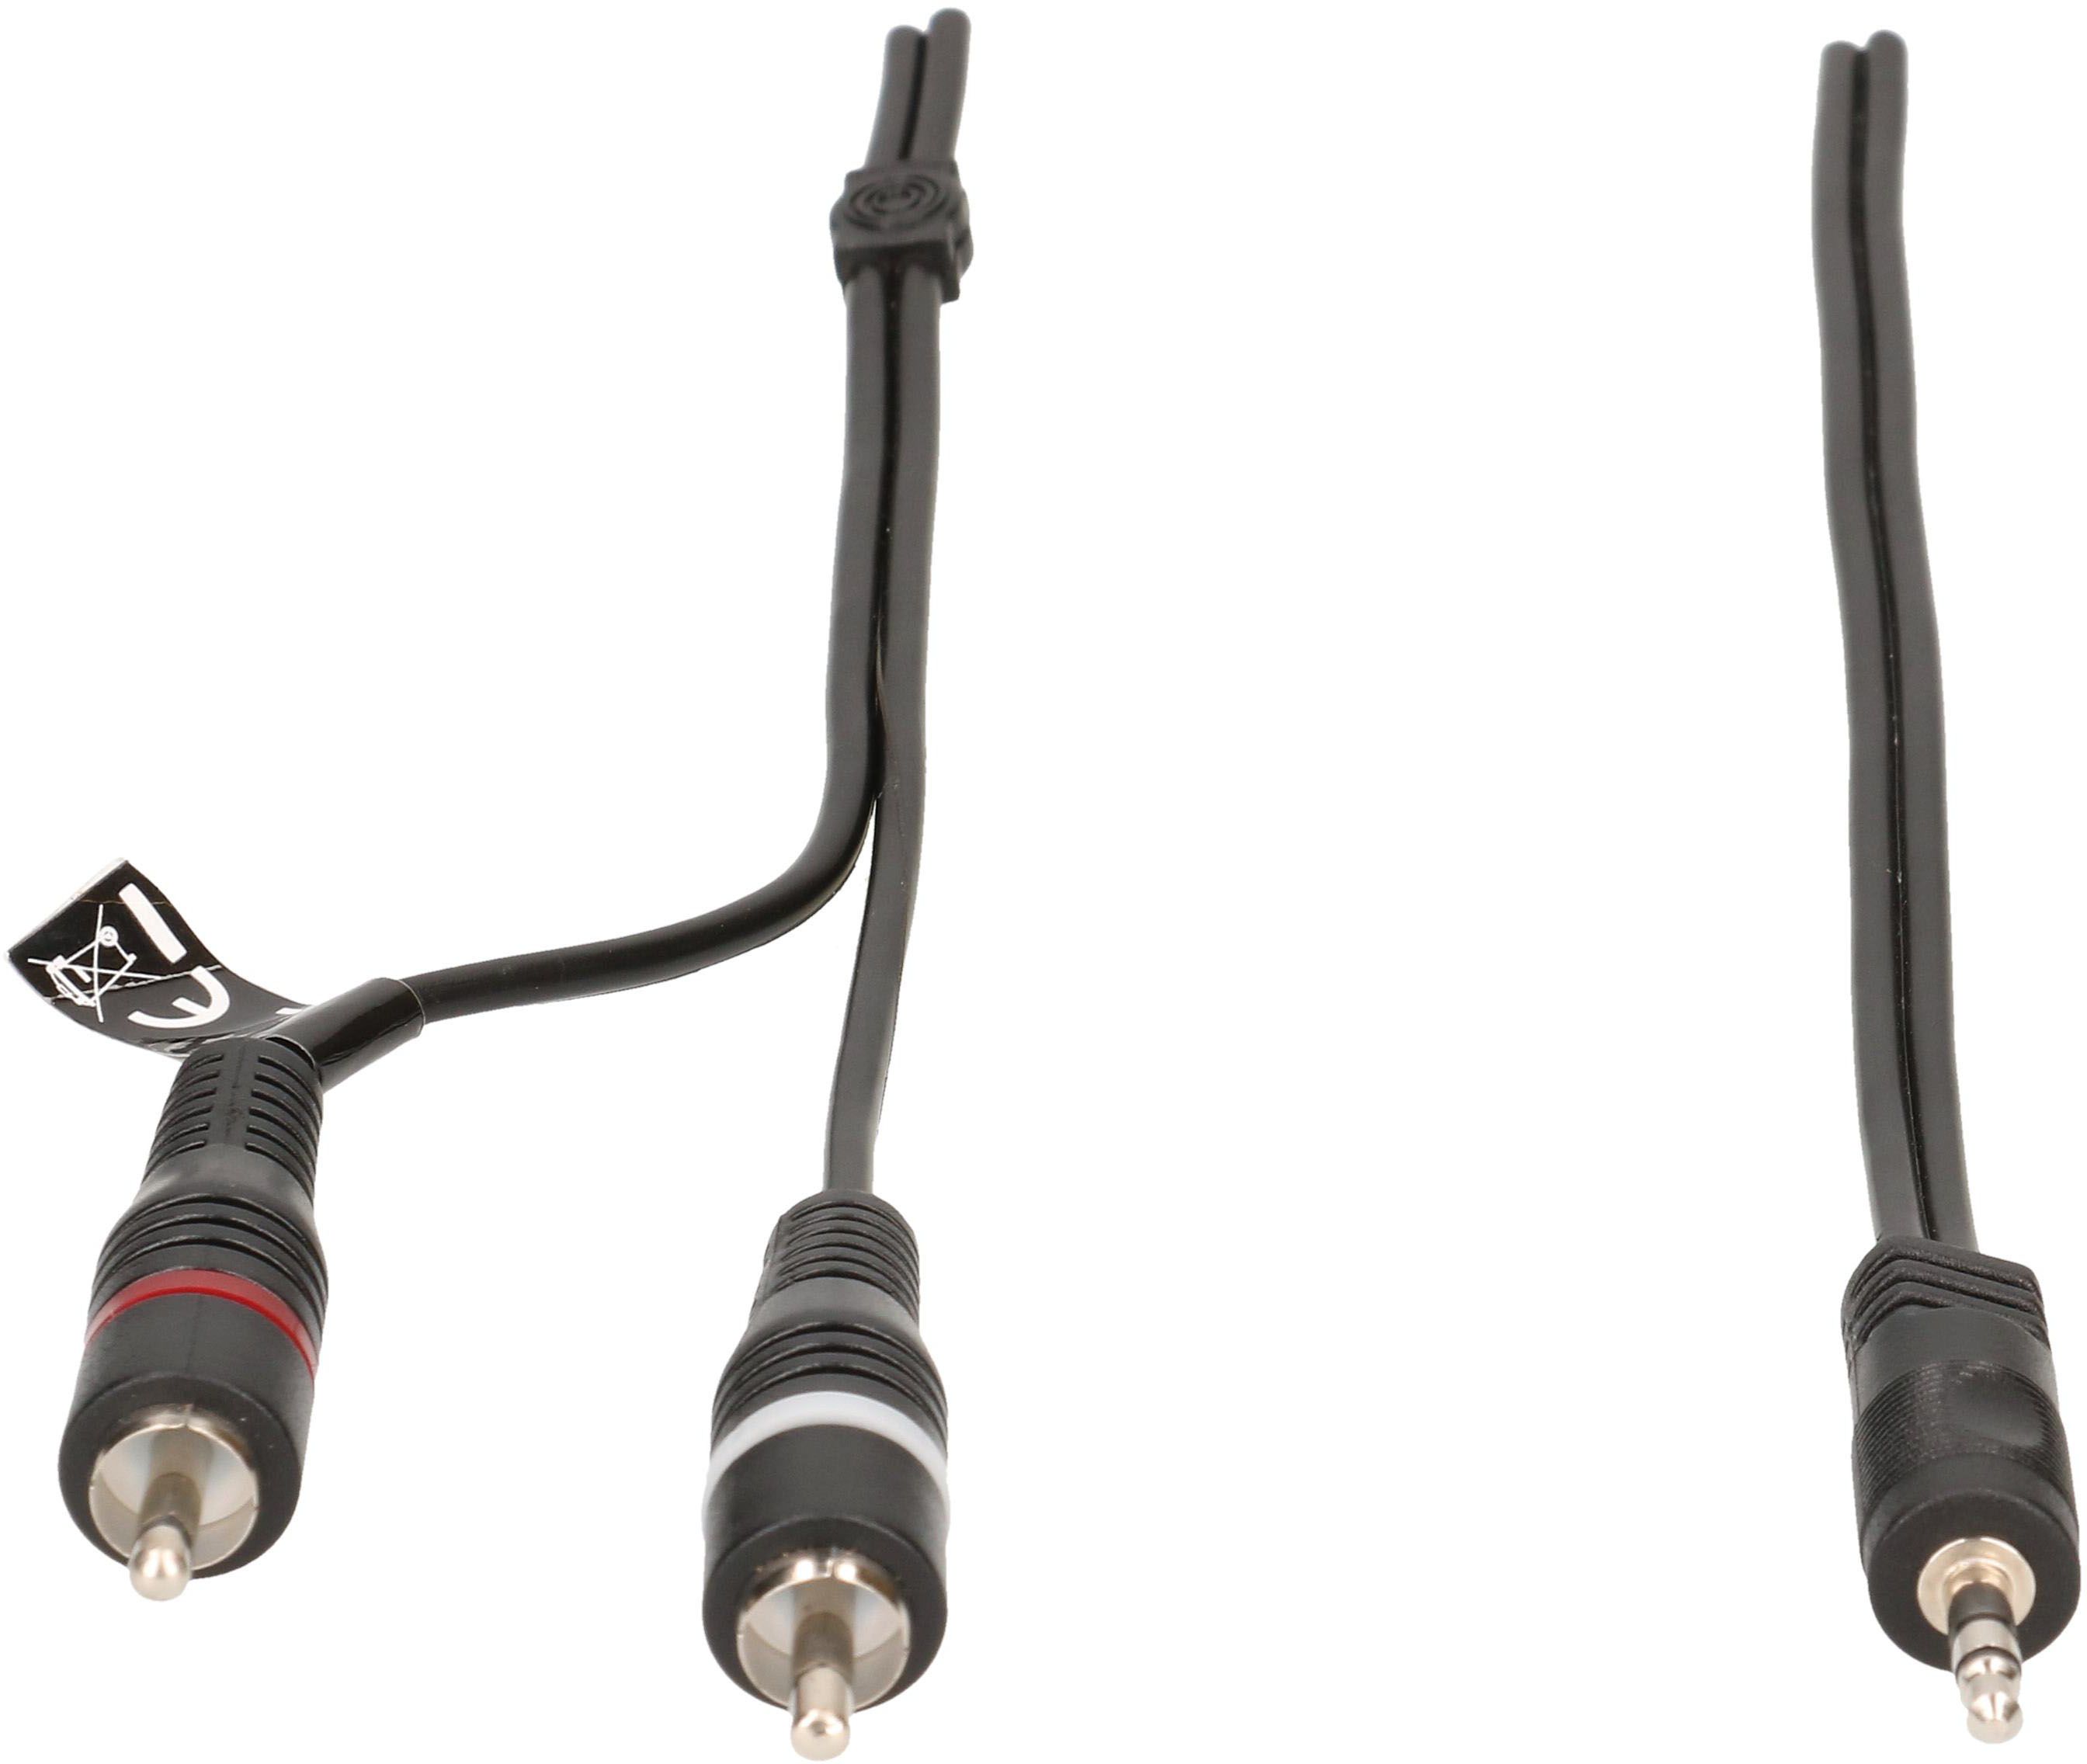 cavo audio adattatore Y HQ stereo spina jack/spina RCA 5m